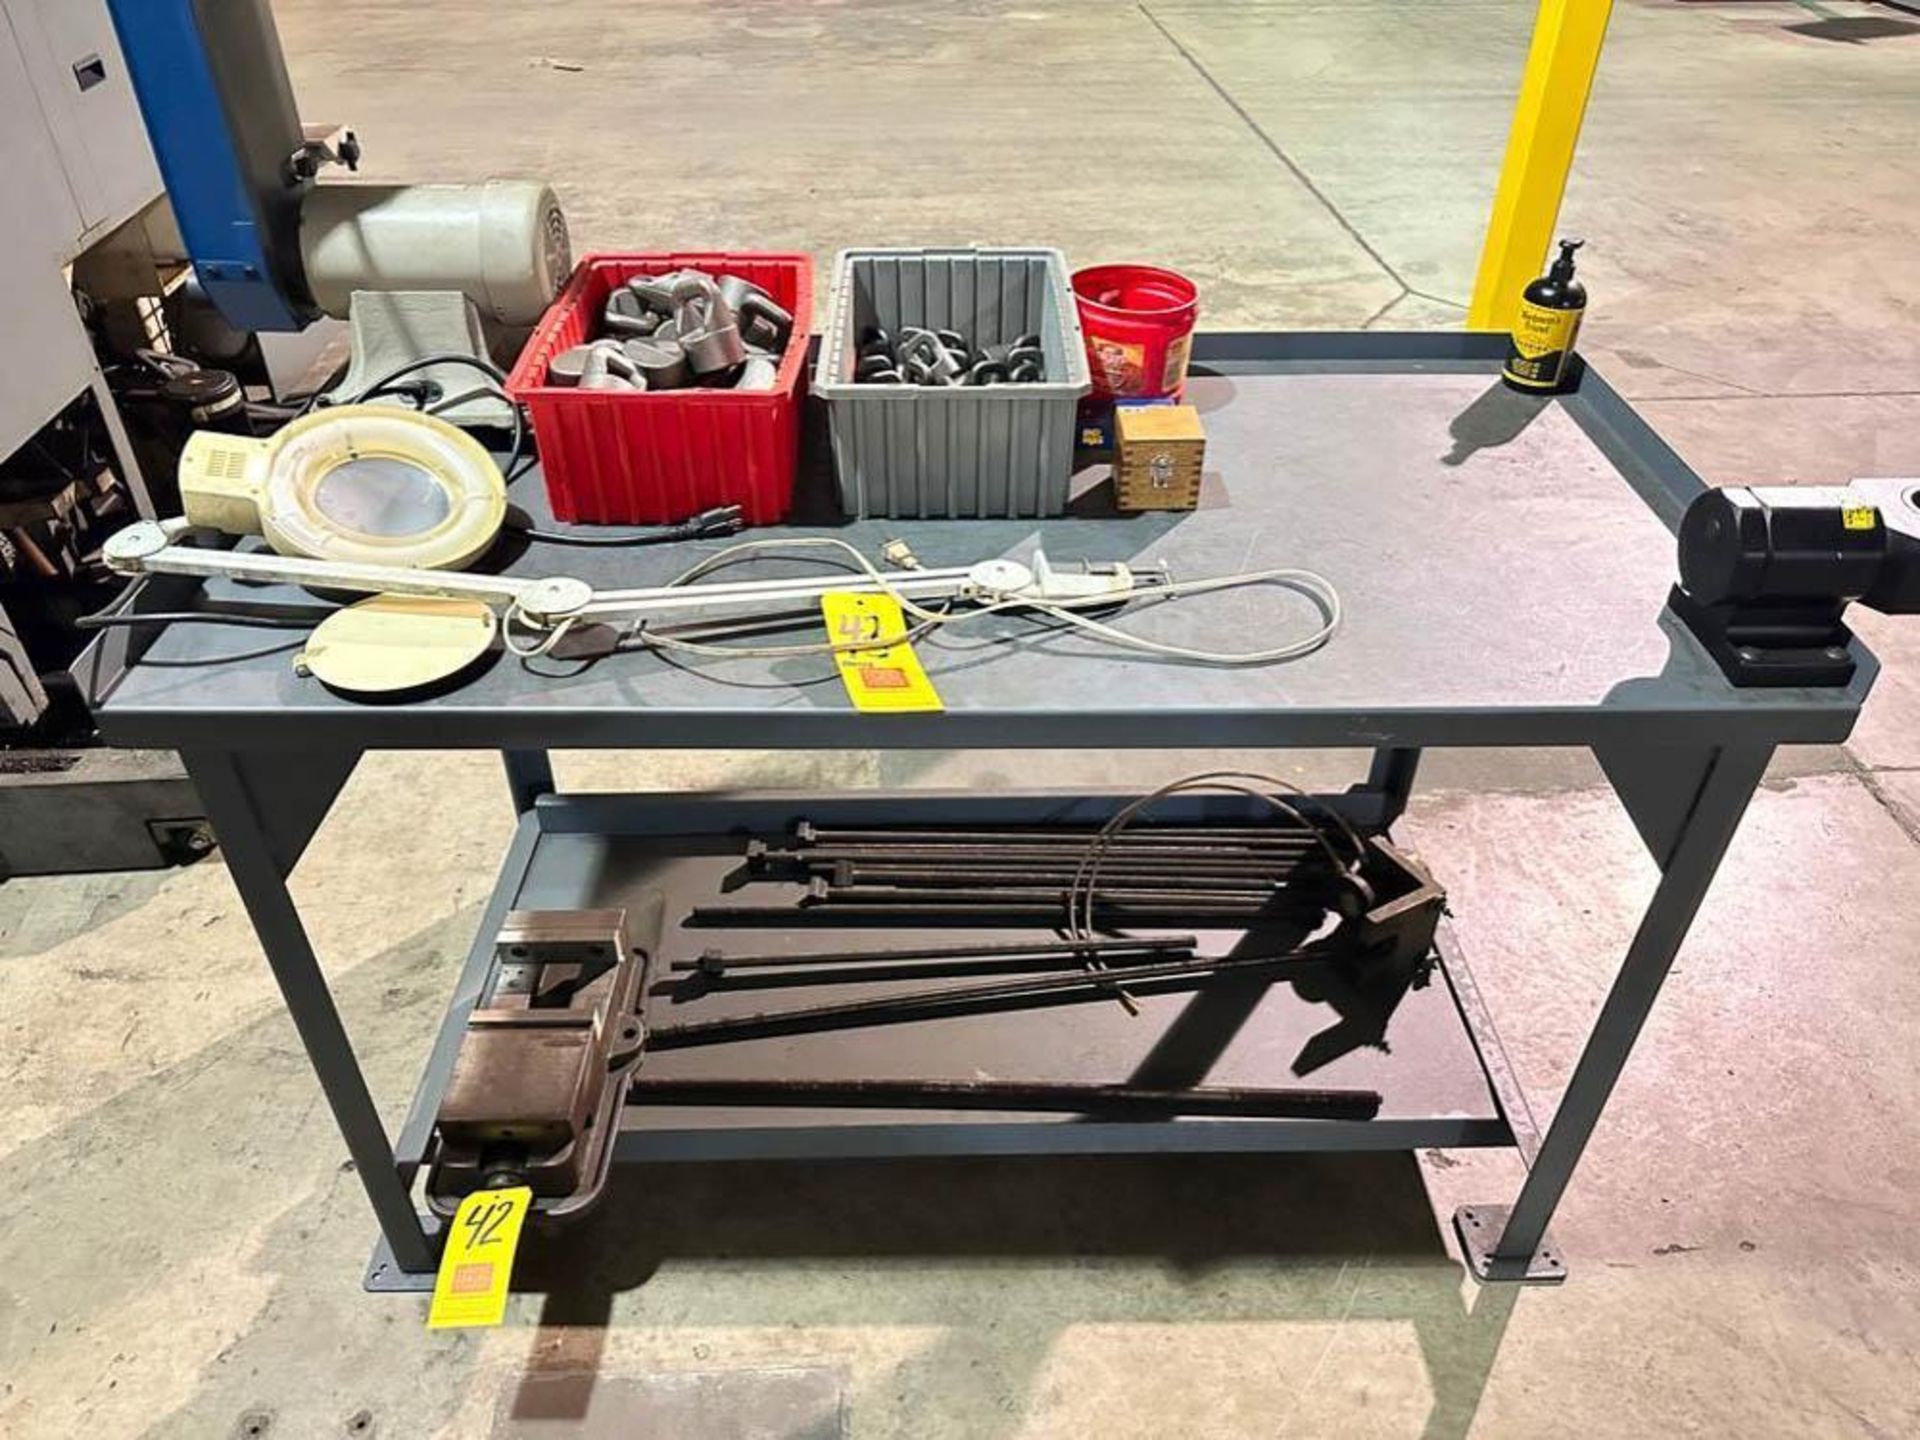 Steel Work Table: 5' x 30" with Shelf with Tool Setter, Lamp and Assorted Steel